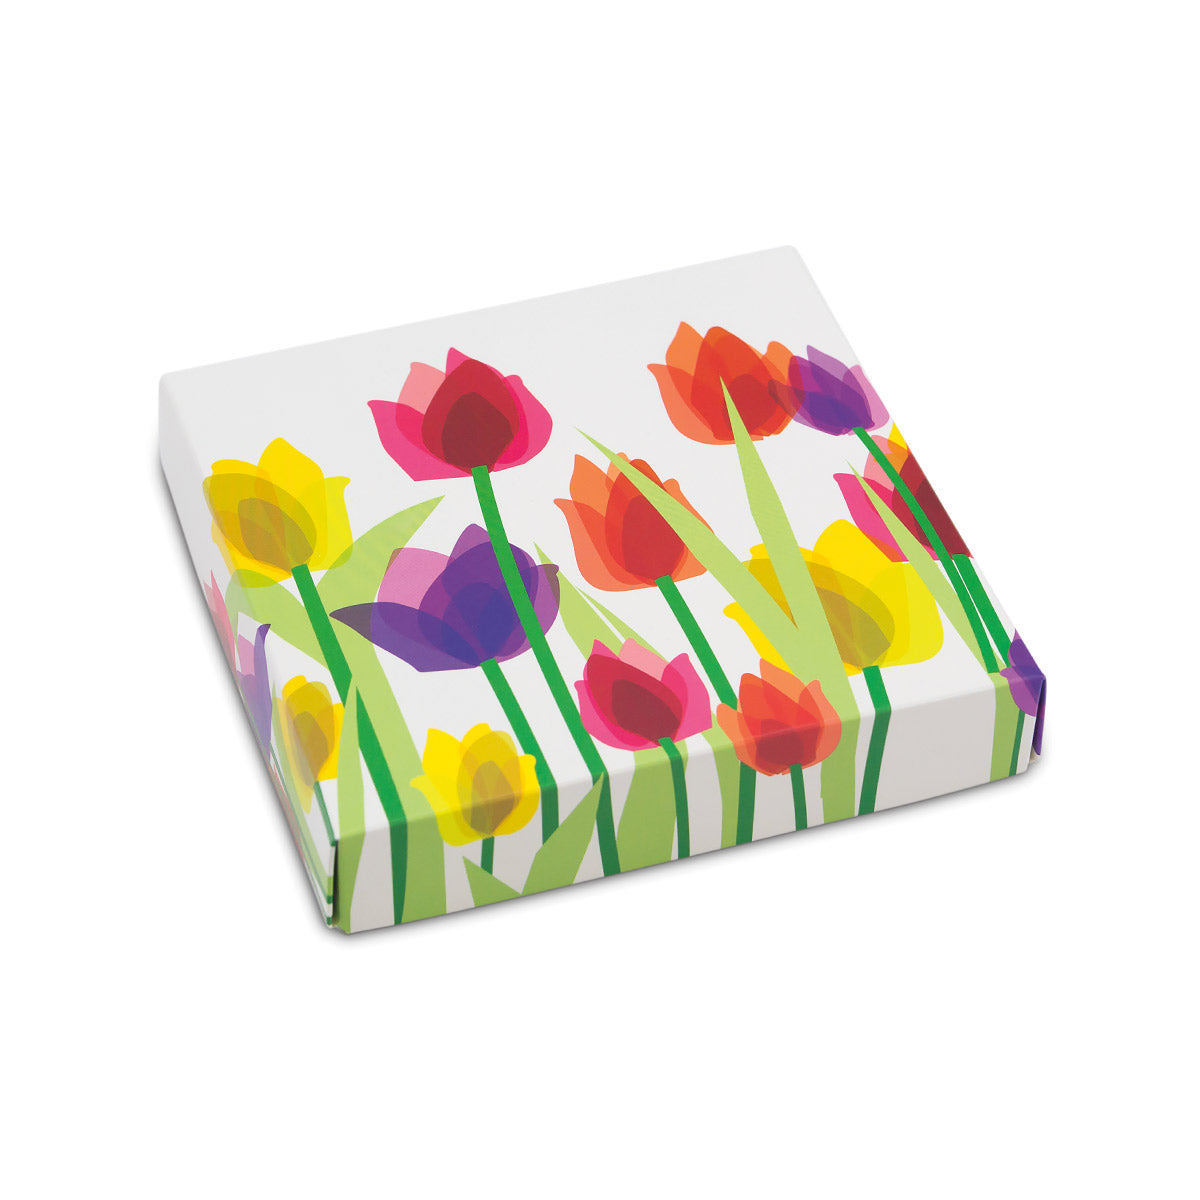 Tulip Themed Box Cover for 16 Piece Holiday Assortment